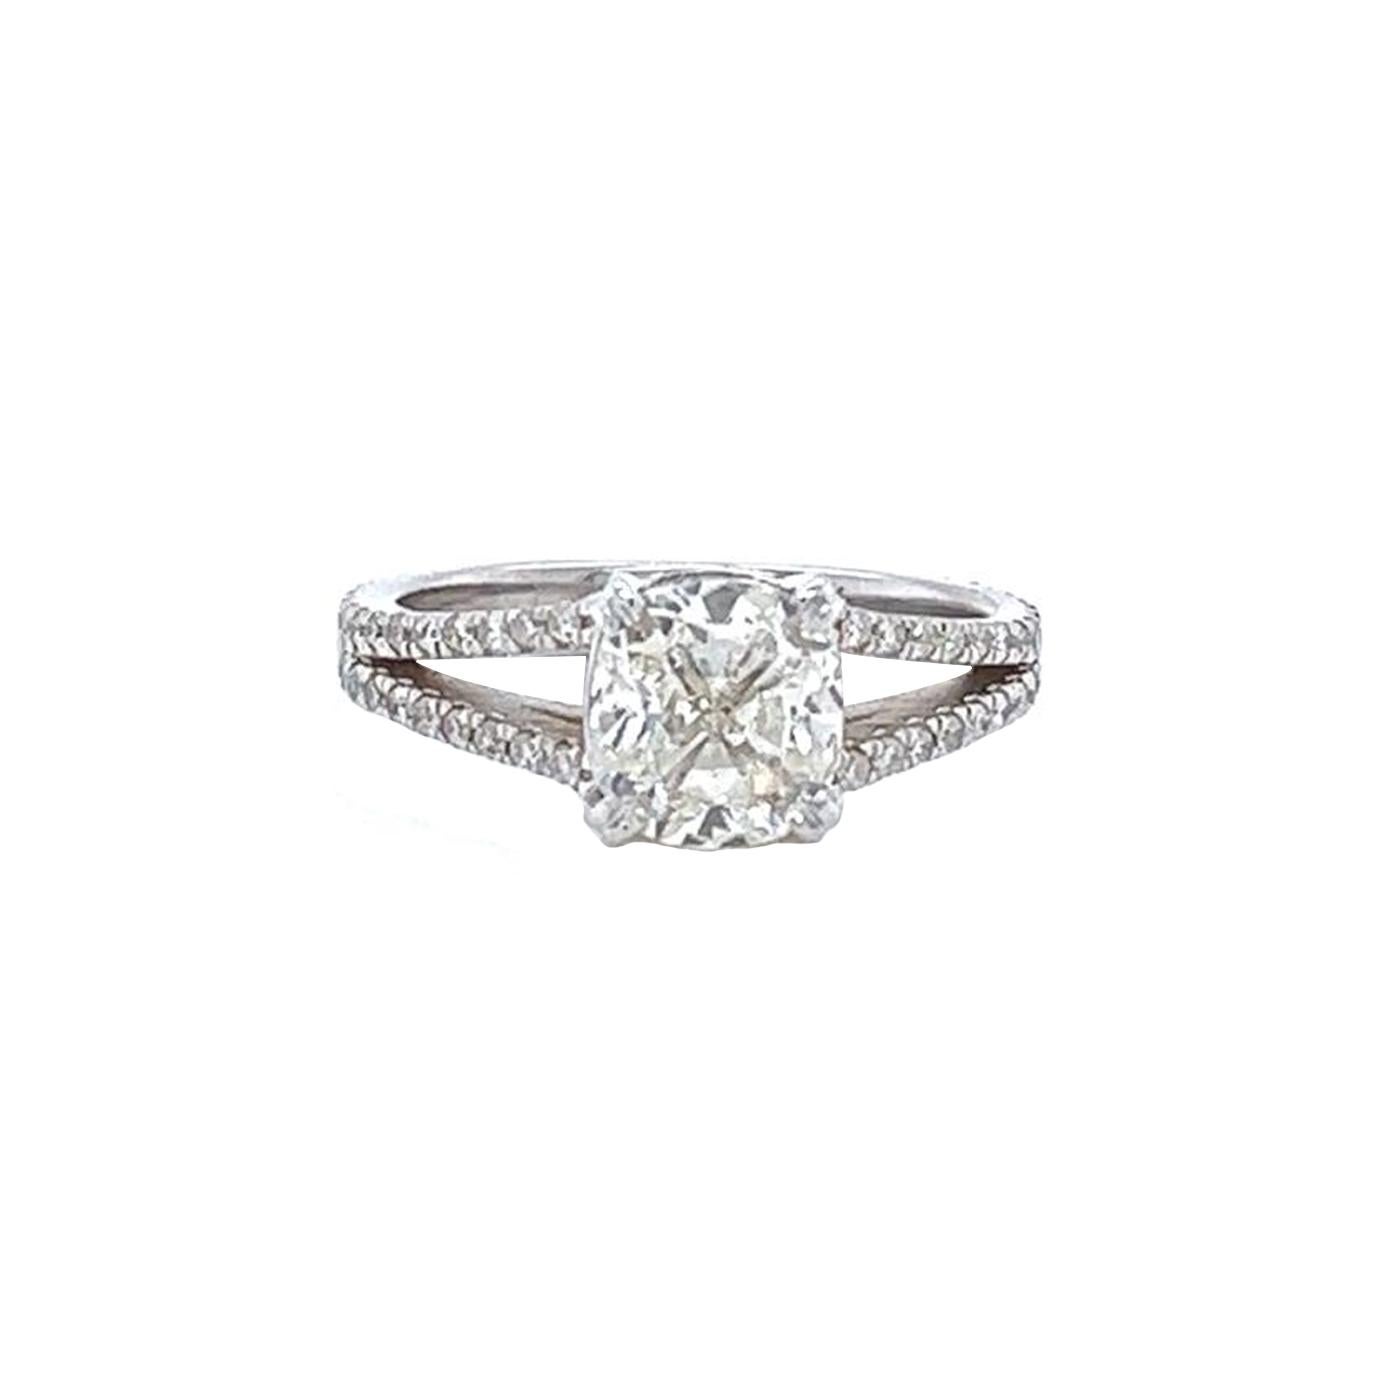 Beautiful Diamond Ring with GIA certification. The ring features a 2.02-carat Cushion cut eye clean natural Diamond of J color and Si1 clarity and it is surrounded by smaller pave diamonds, Ring is crafted in 14 Karat White Gold with dimensions of